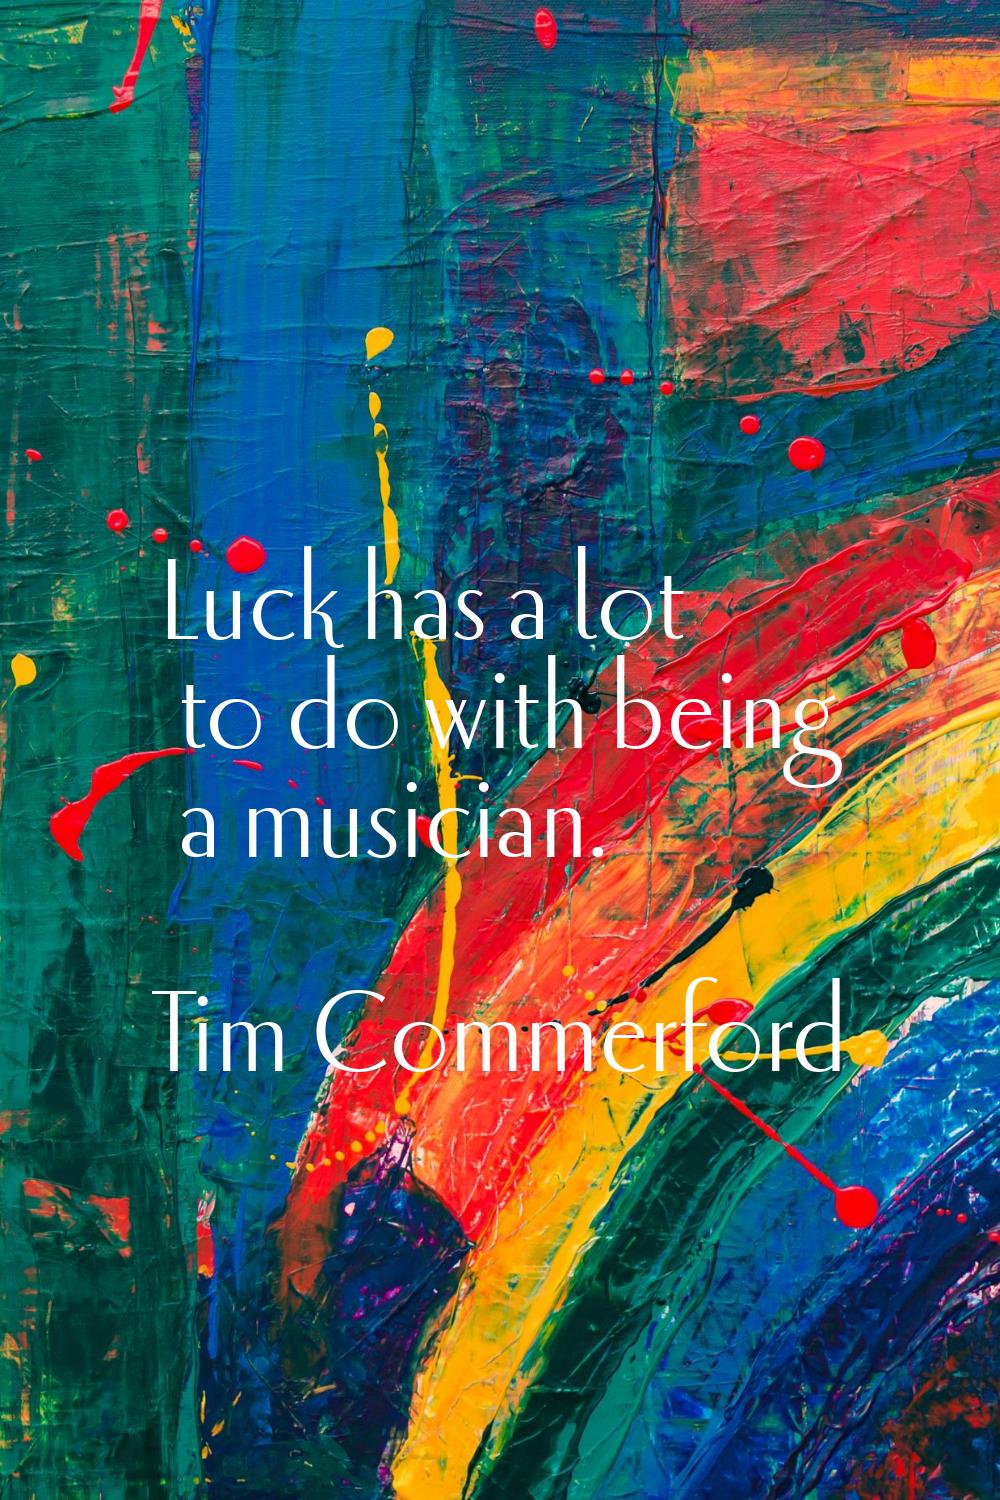 Luck has a lot to do with being a musician.